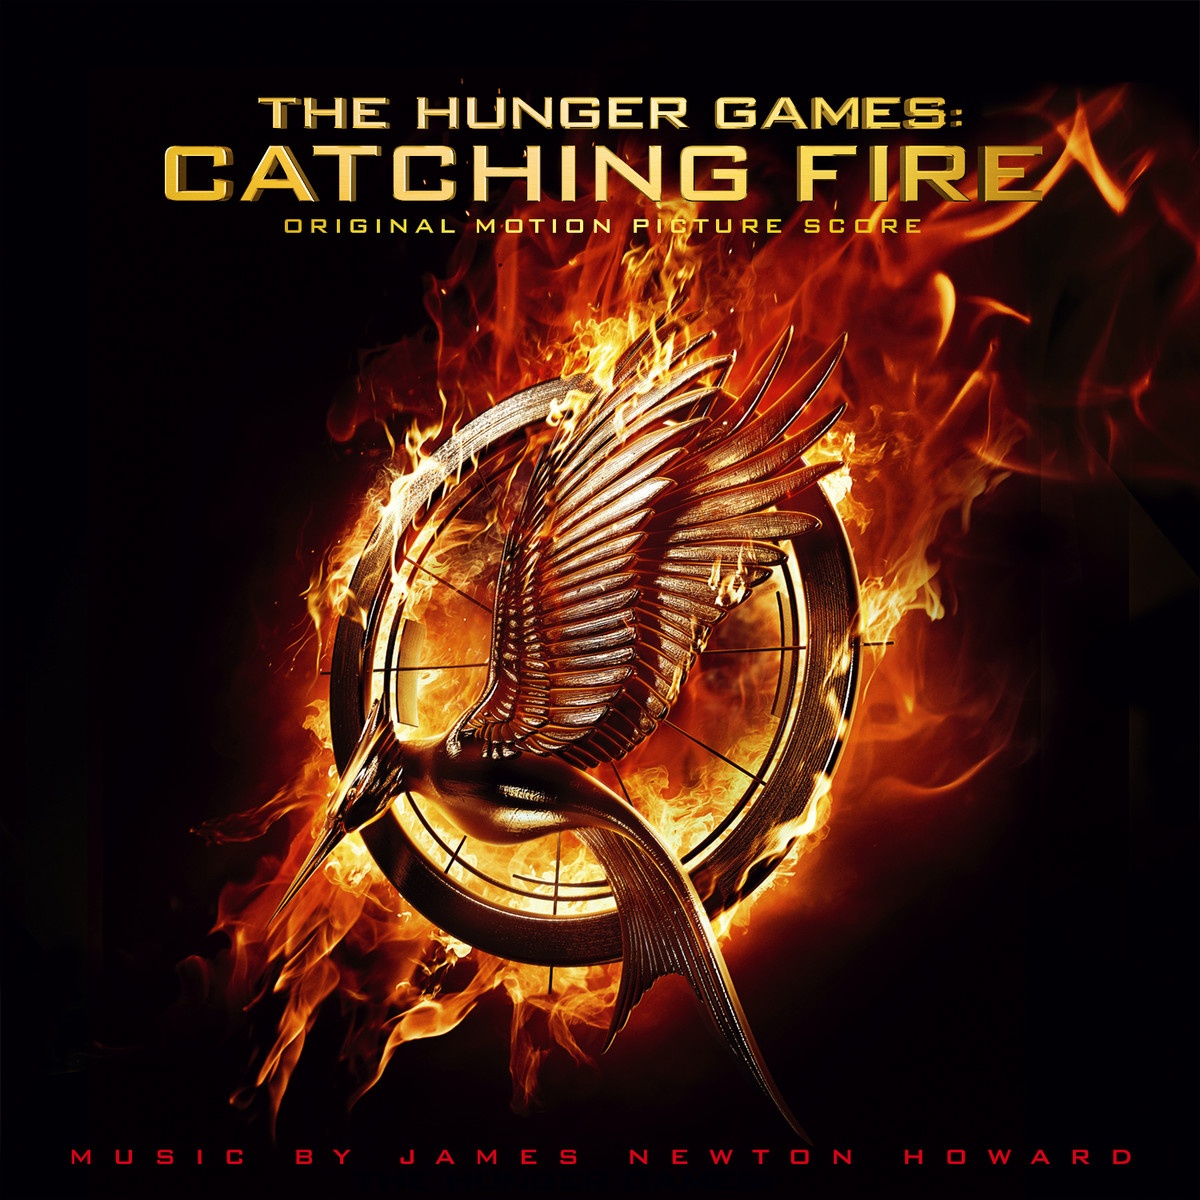 The Hunger Games: Catching Fire(Original Motion Picture Score)